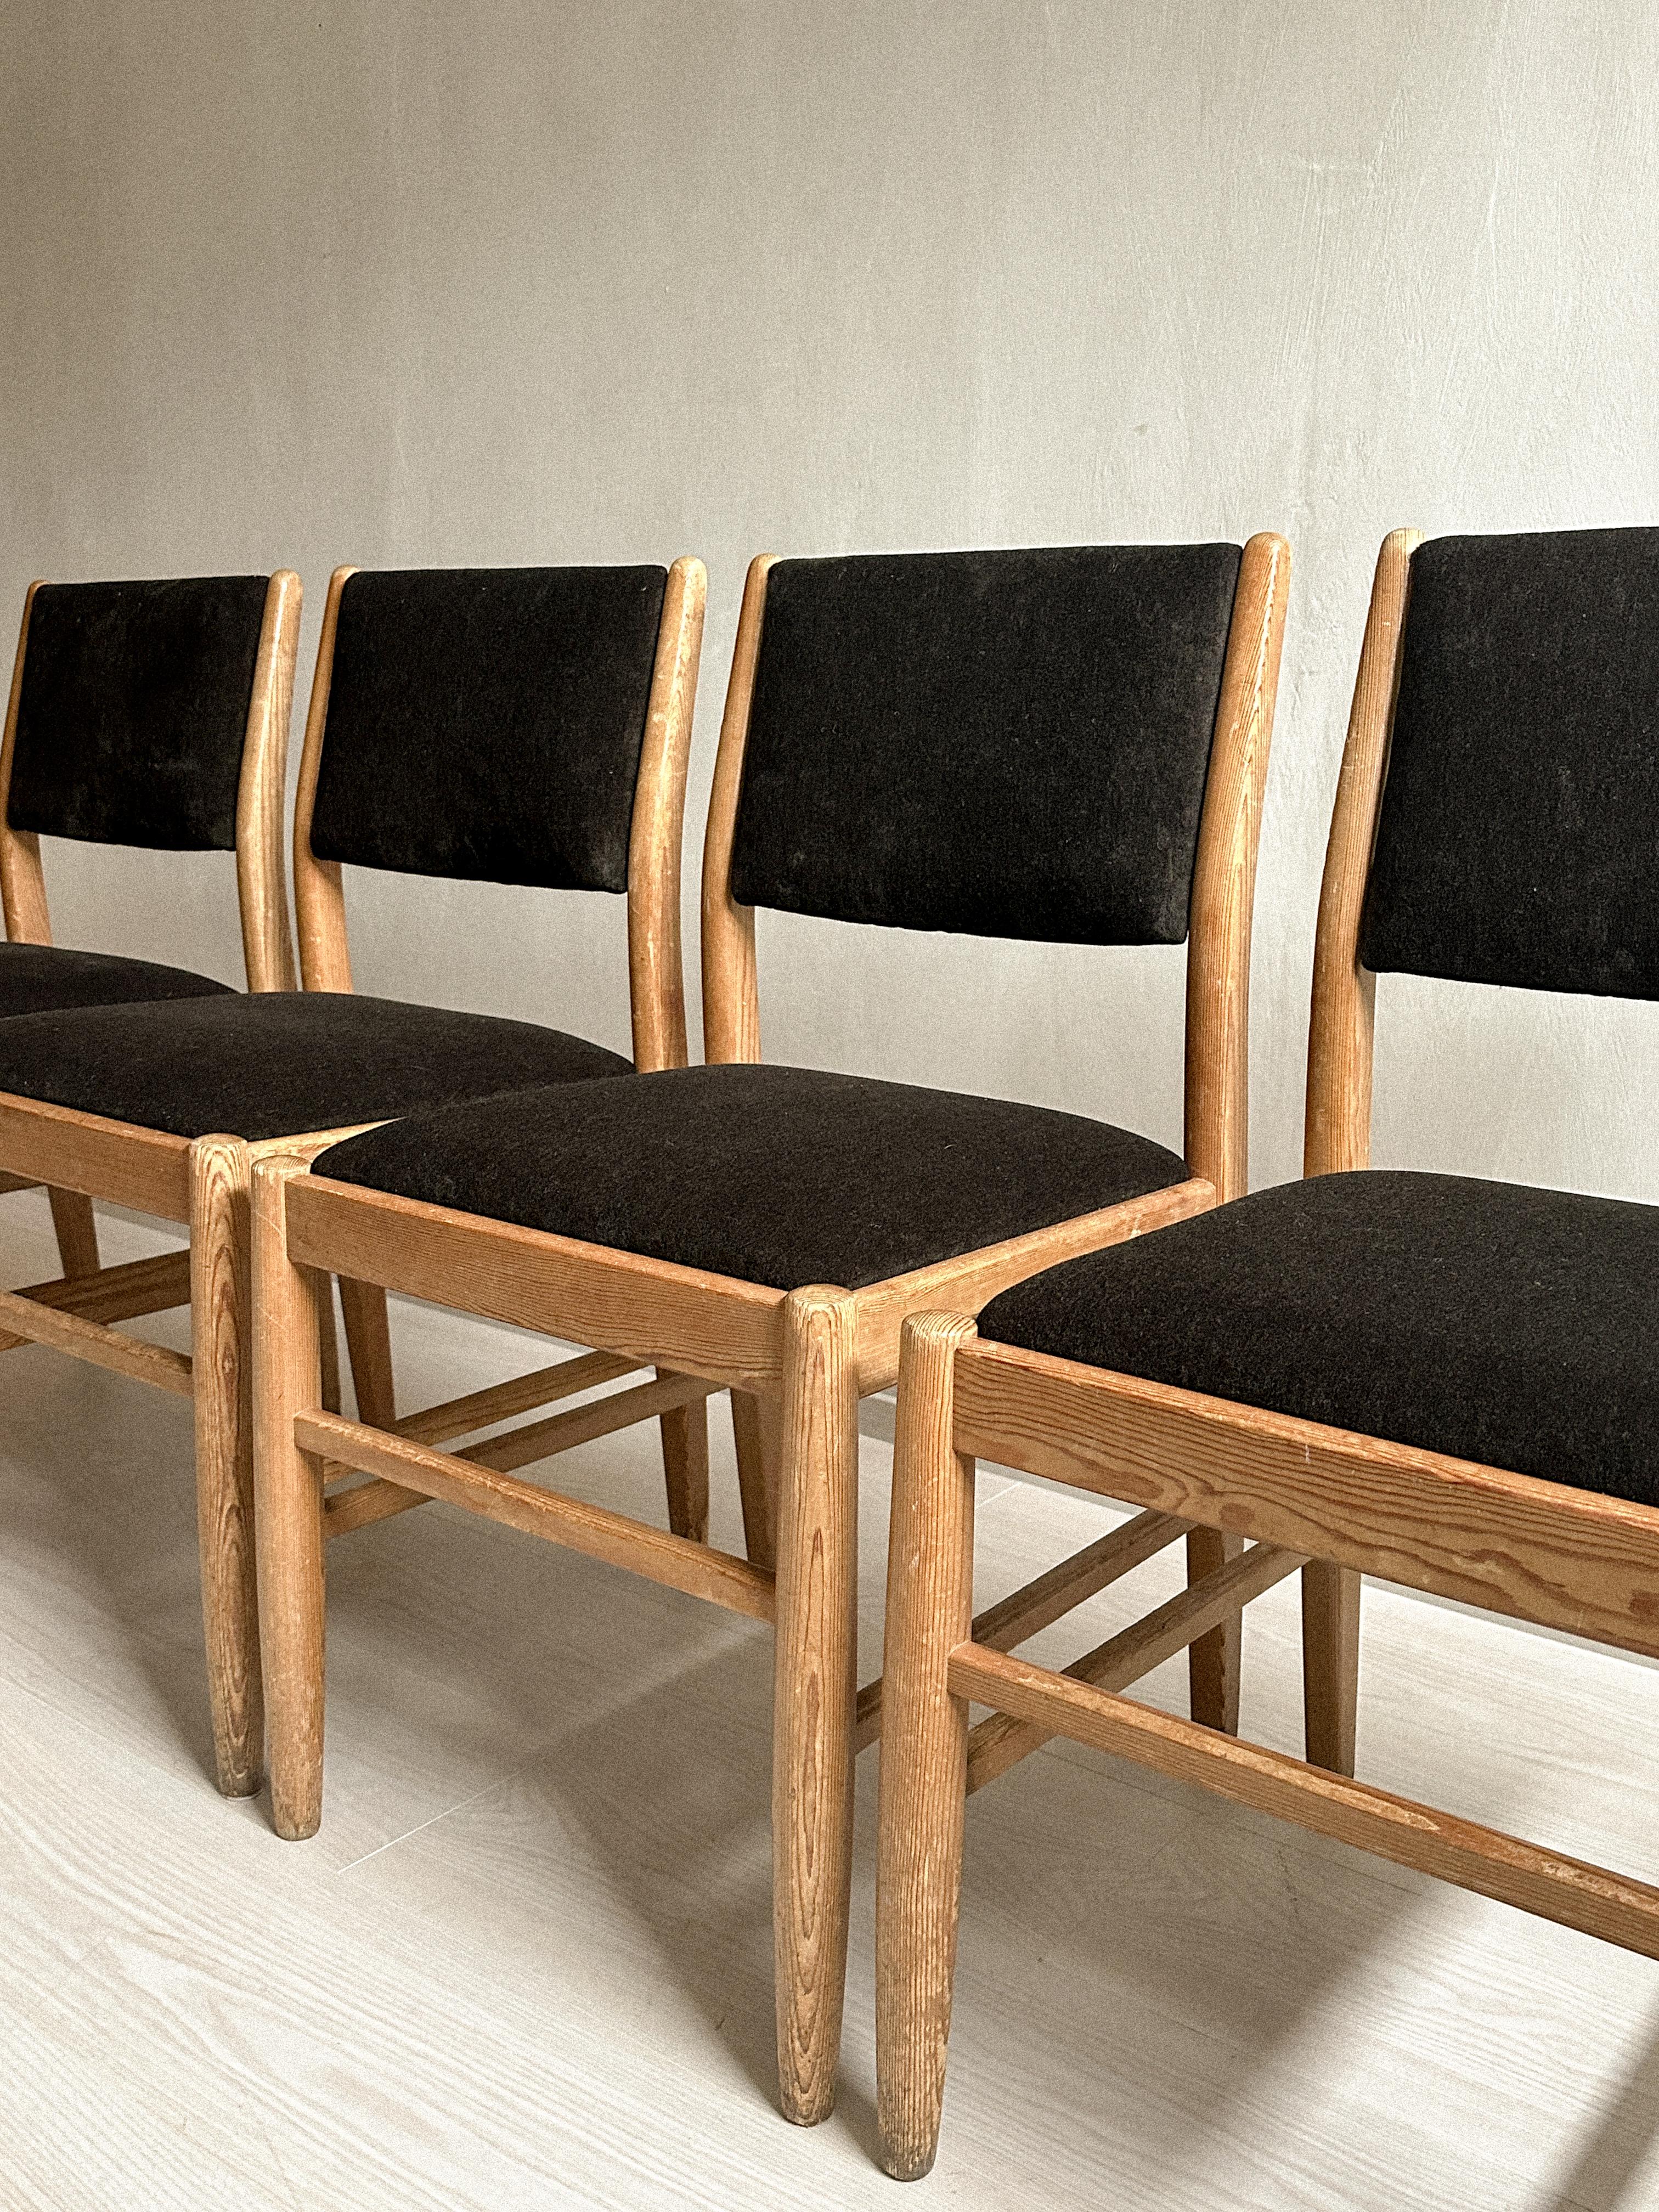 A Set of 4 Dining Chairs, Pine and Wool Velour, Scandinavia, c. 1960s  For Sale 5